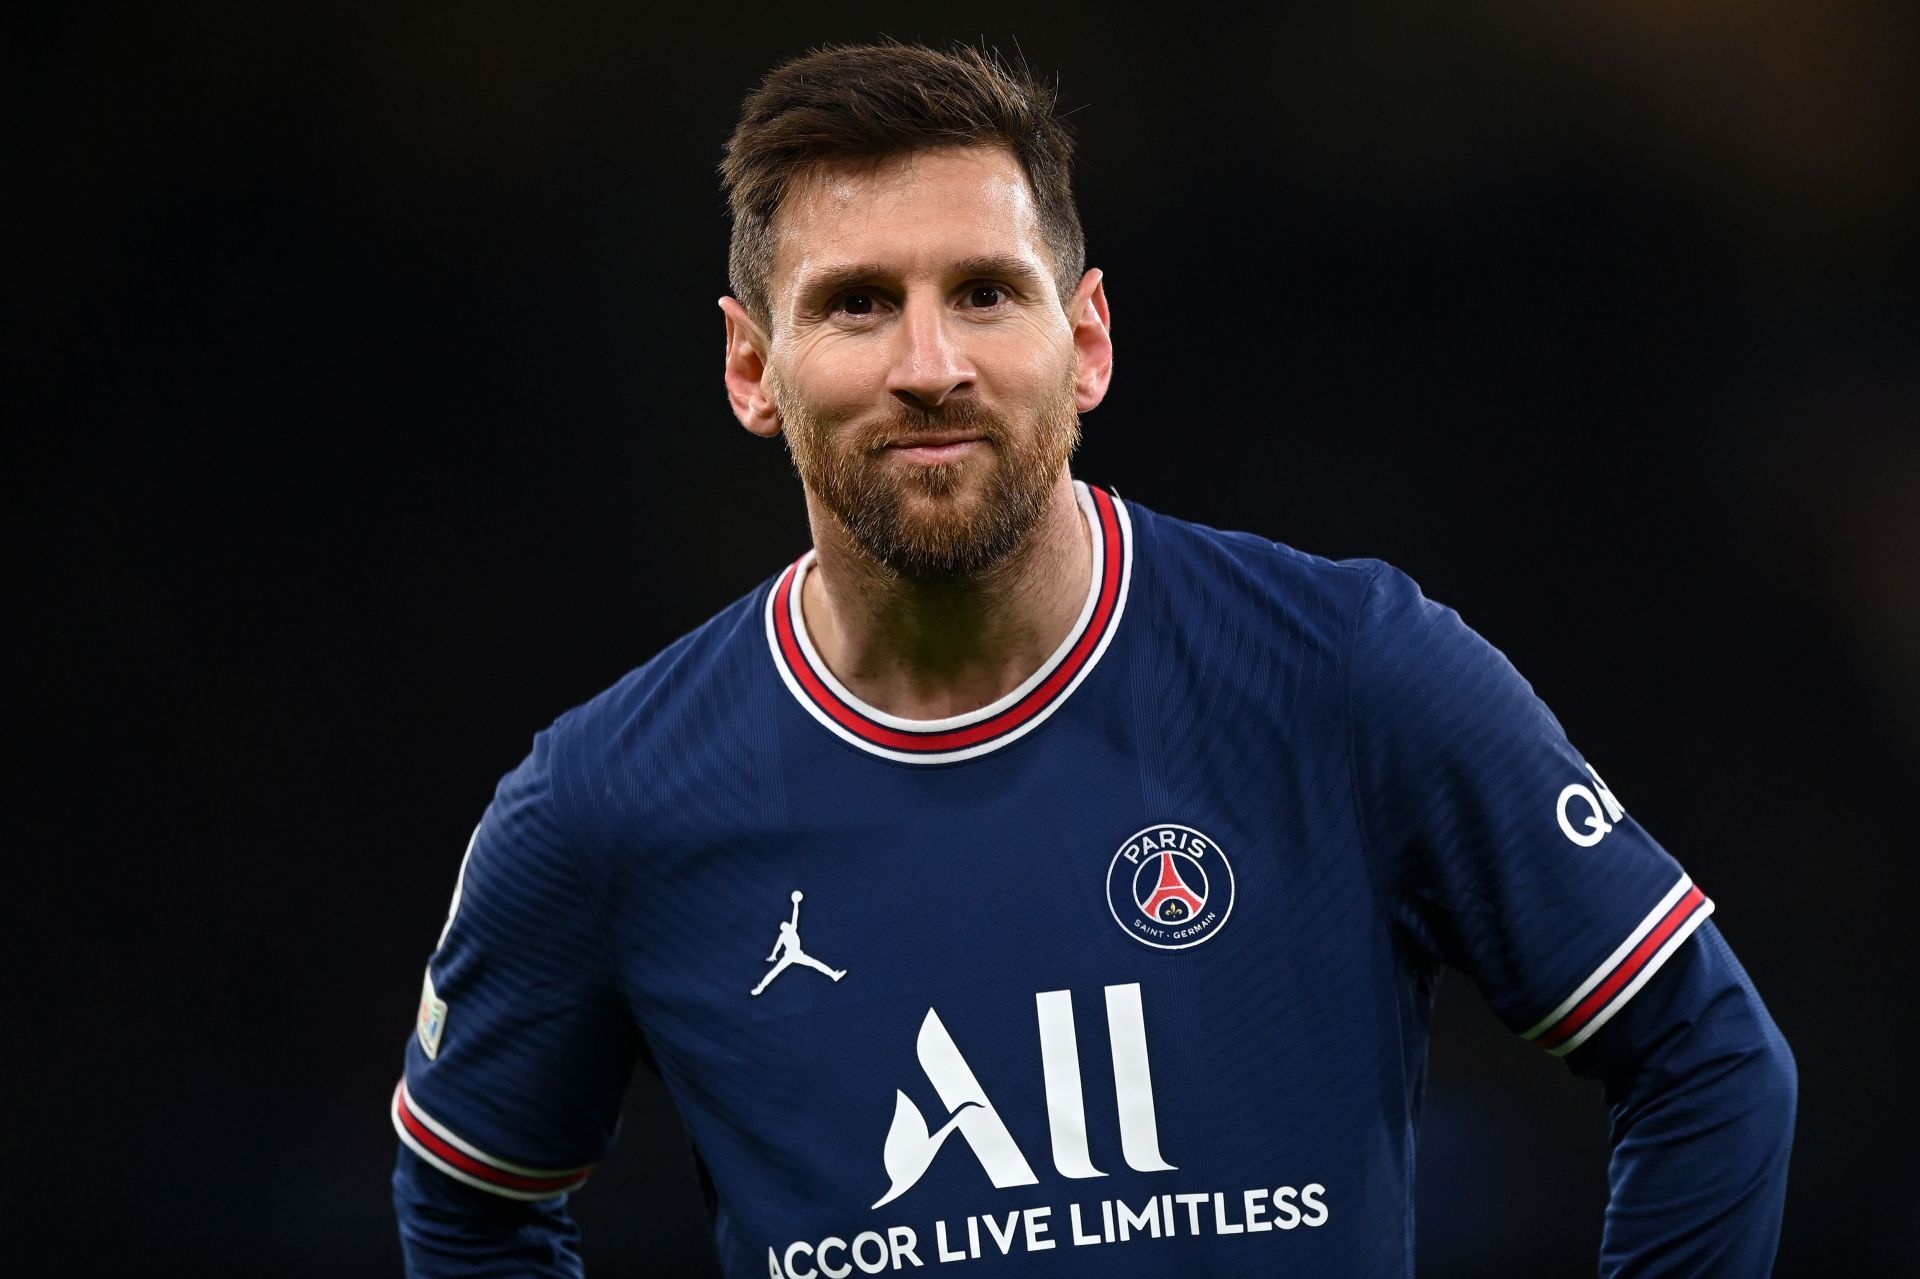 Lionel Messi is in the final year of his contract at PSG.